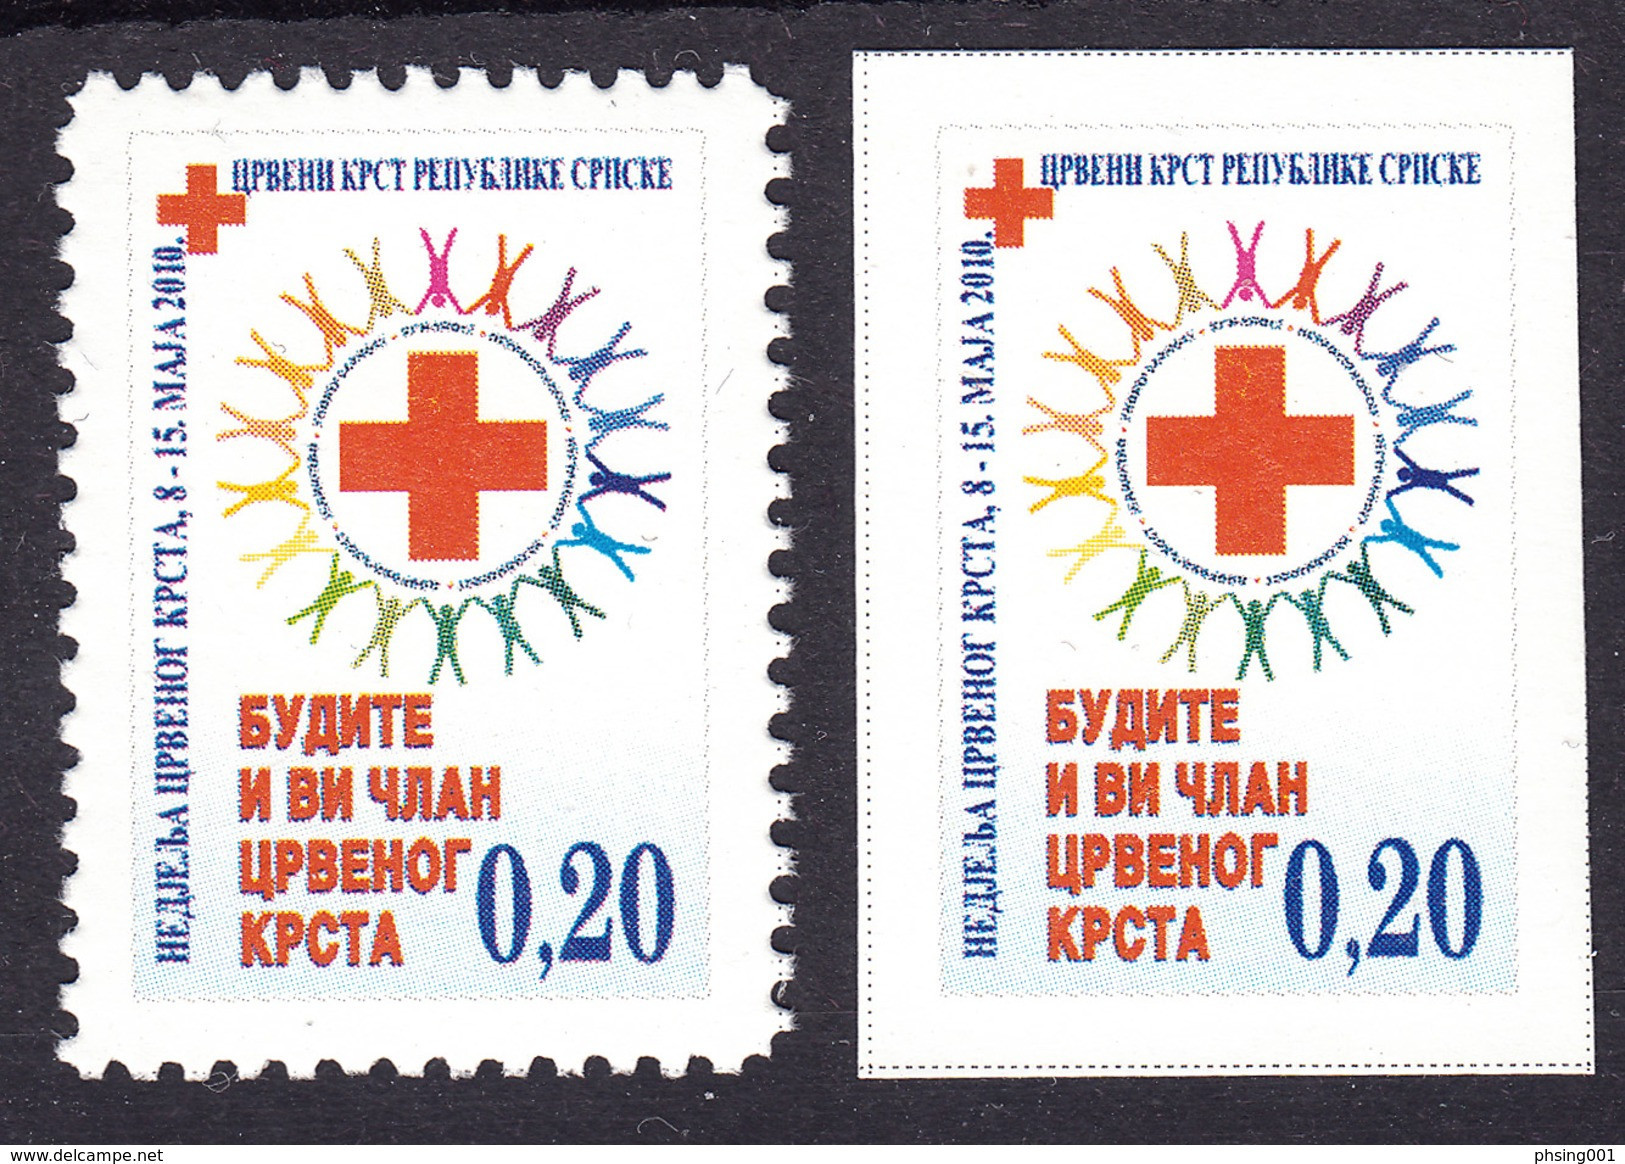 Bosnia Serbia 2010 Red Cross Rotes Kreuz Croix Rouge, Perforated + Imperforated, Tax, Charity, Surcharge Stamps MNH - Bosnien-Herzegowina